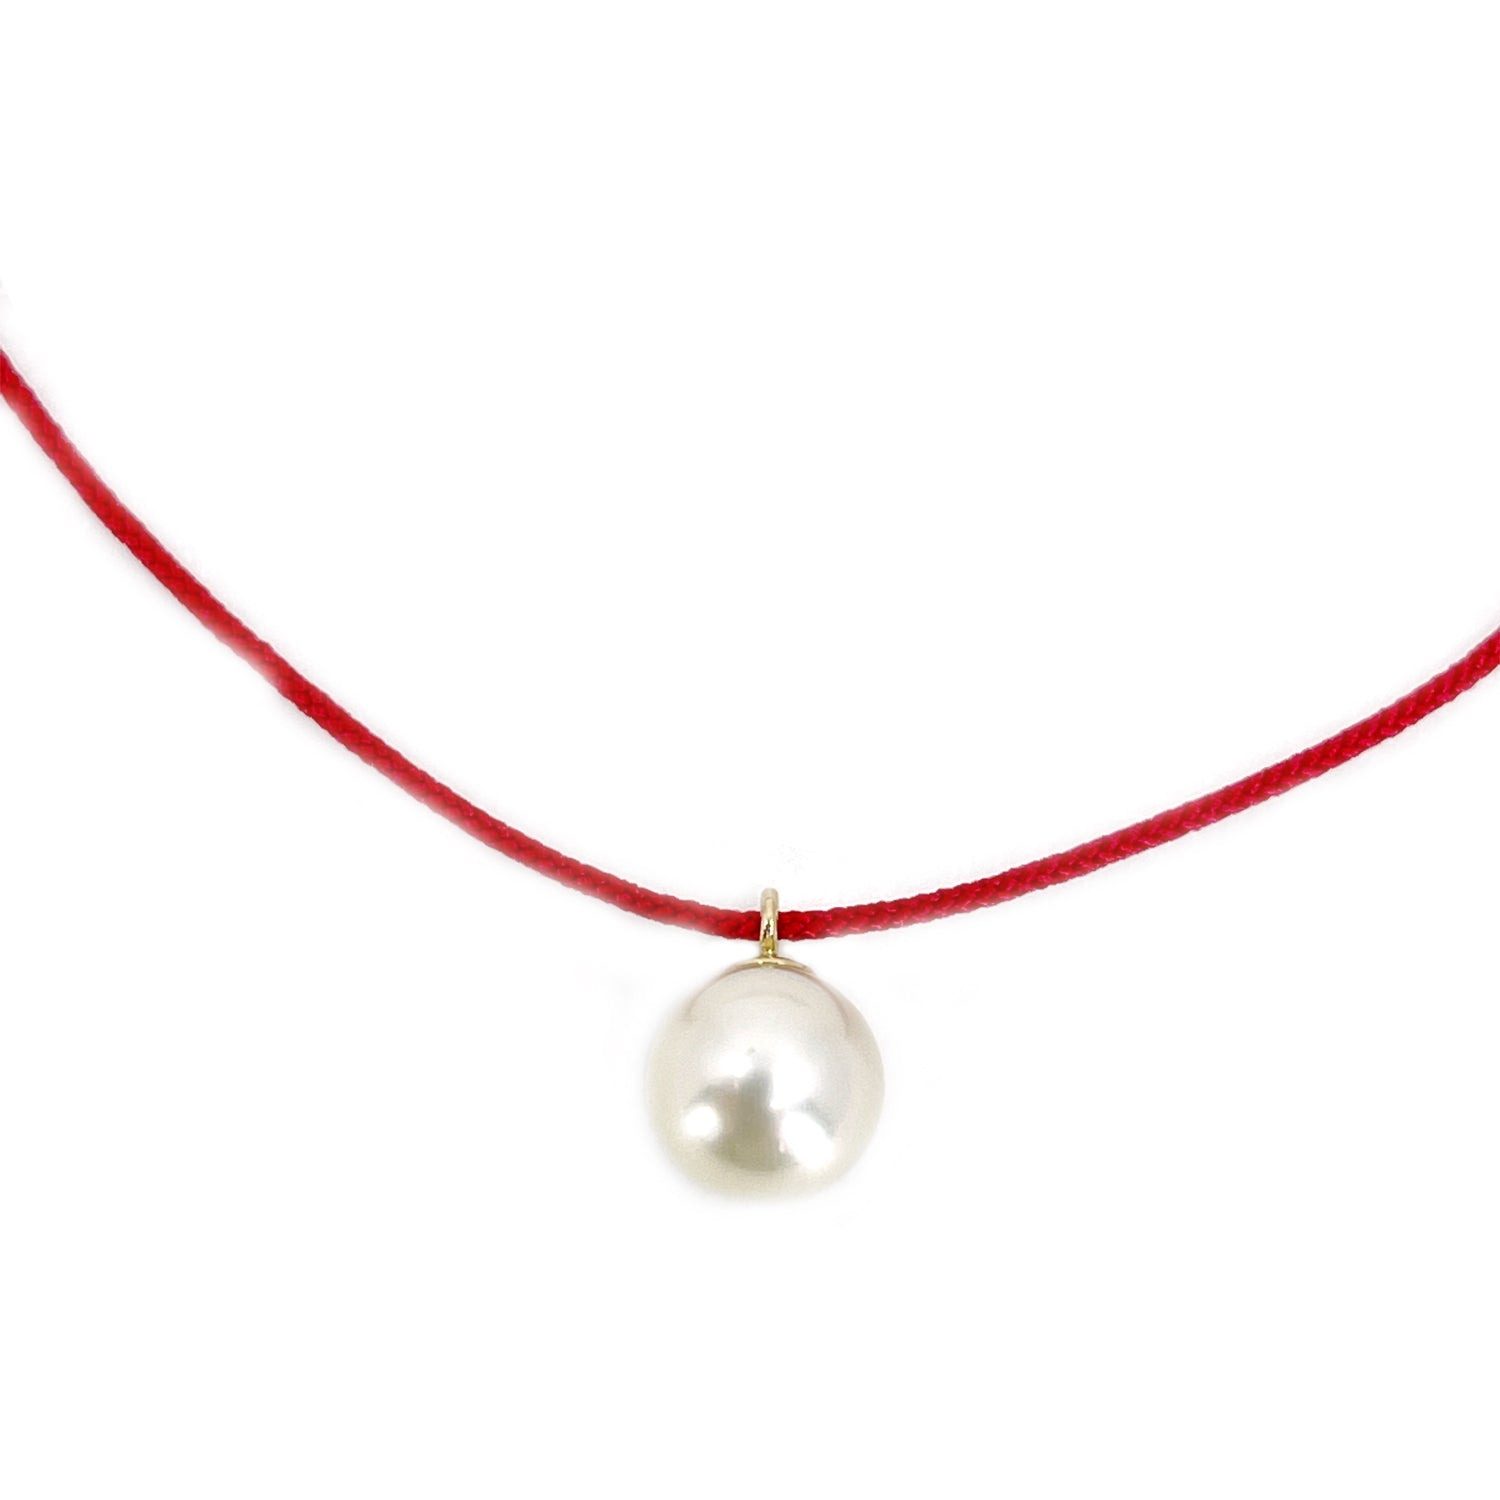 Kumihimo Braided Red Vermillion Silk Vintage Akoya Saltwater Cultured Pearl Adjustable Necklace-14K Yellow Gold